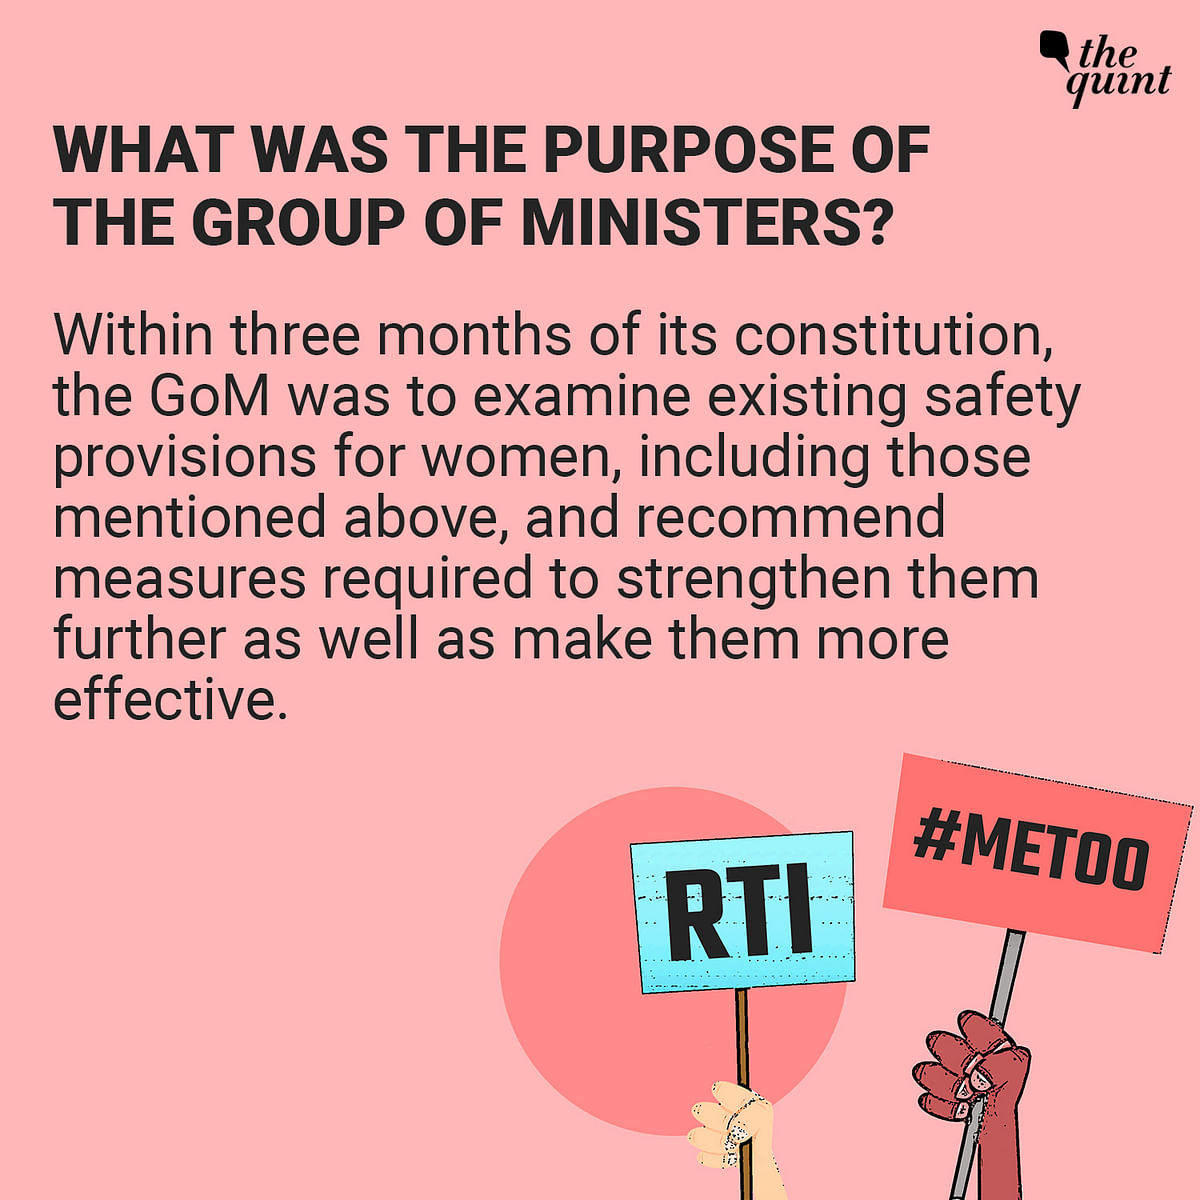 Three years after a govt panel was formed to make workplaces safer for women, RTI reveals a call is yet to be taken.